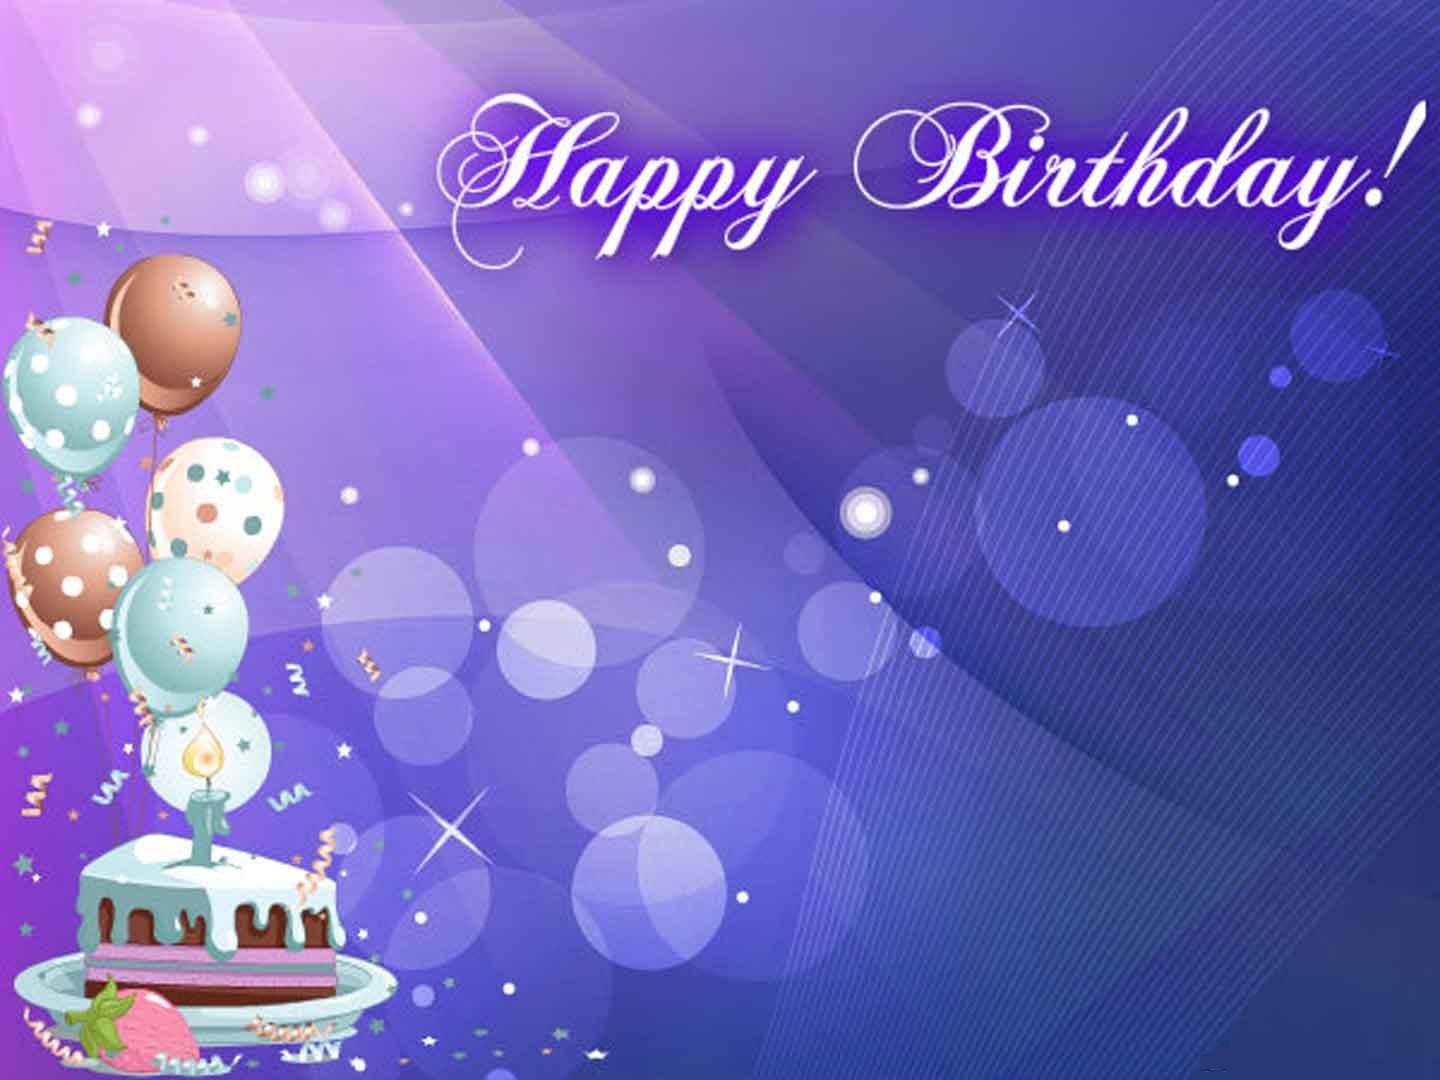 Happy Birthday background Images, Wallpapers and Pictures